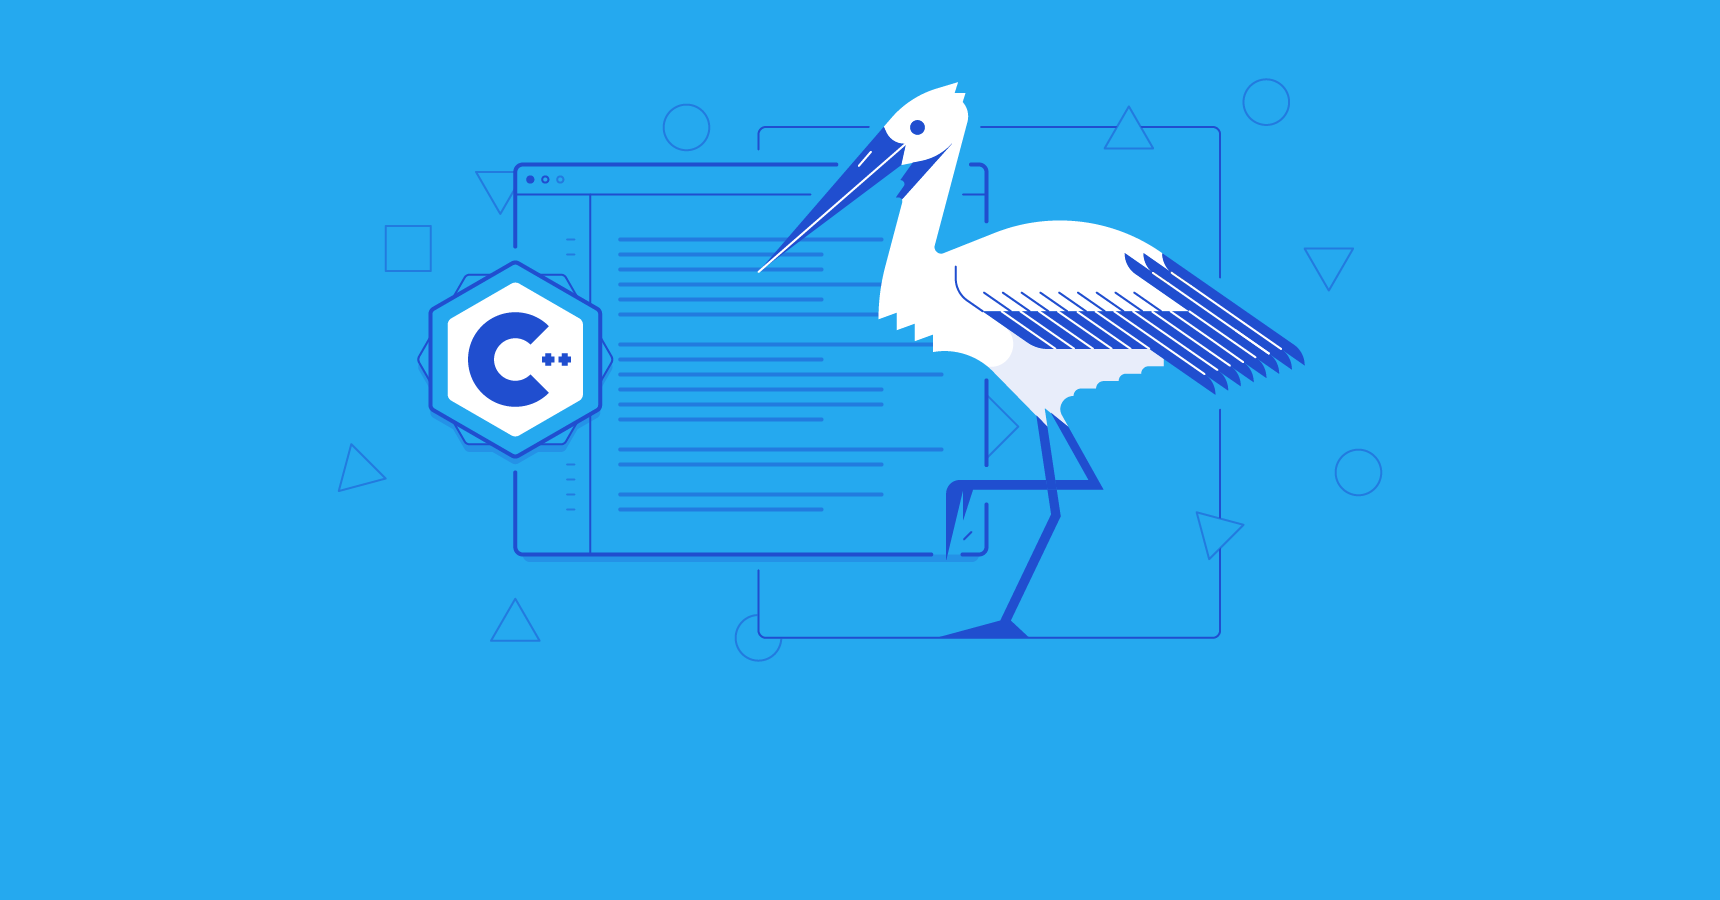 Stork: How to Make a Programming Language in C++